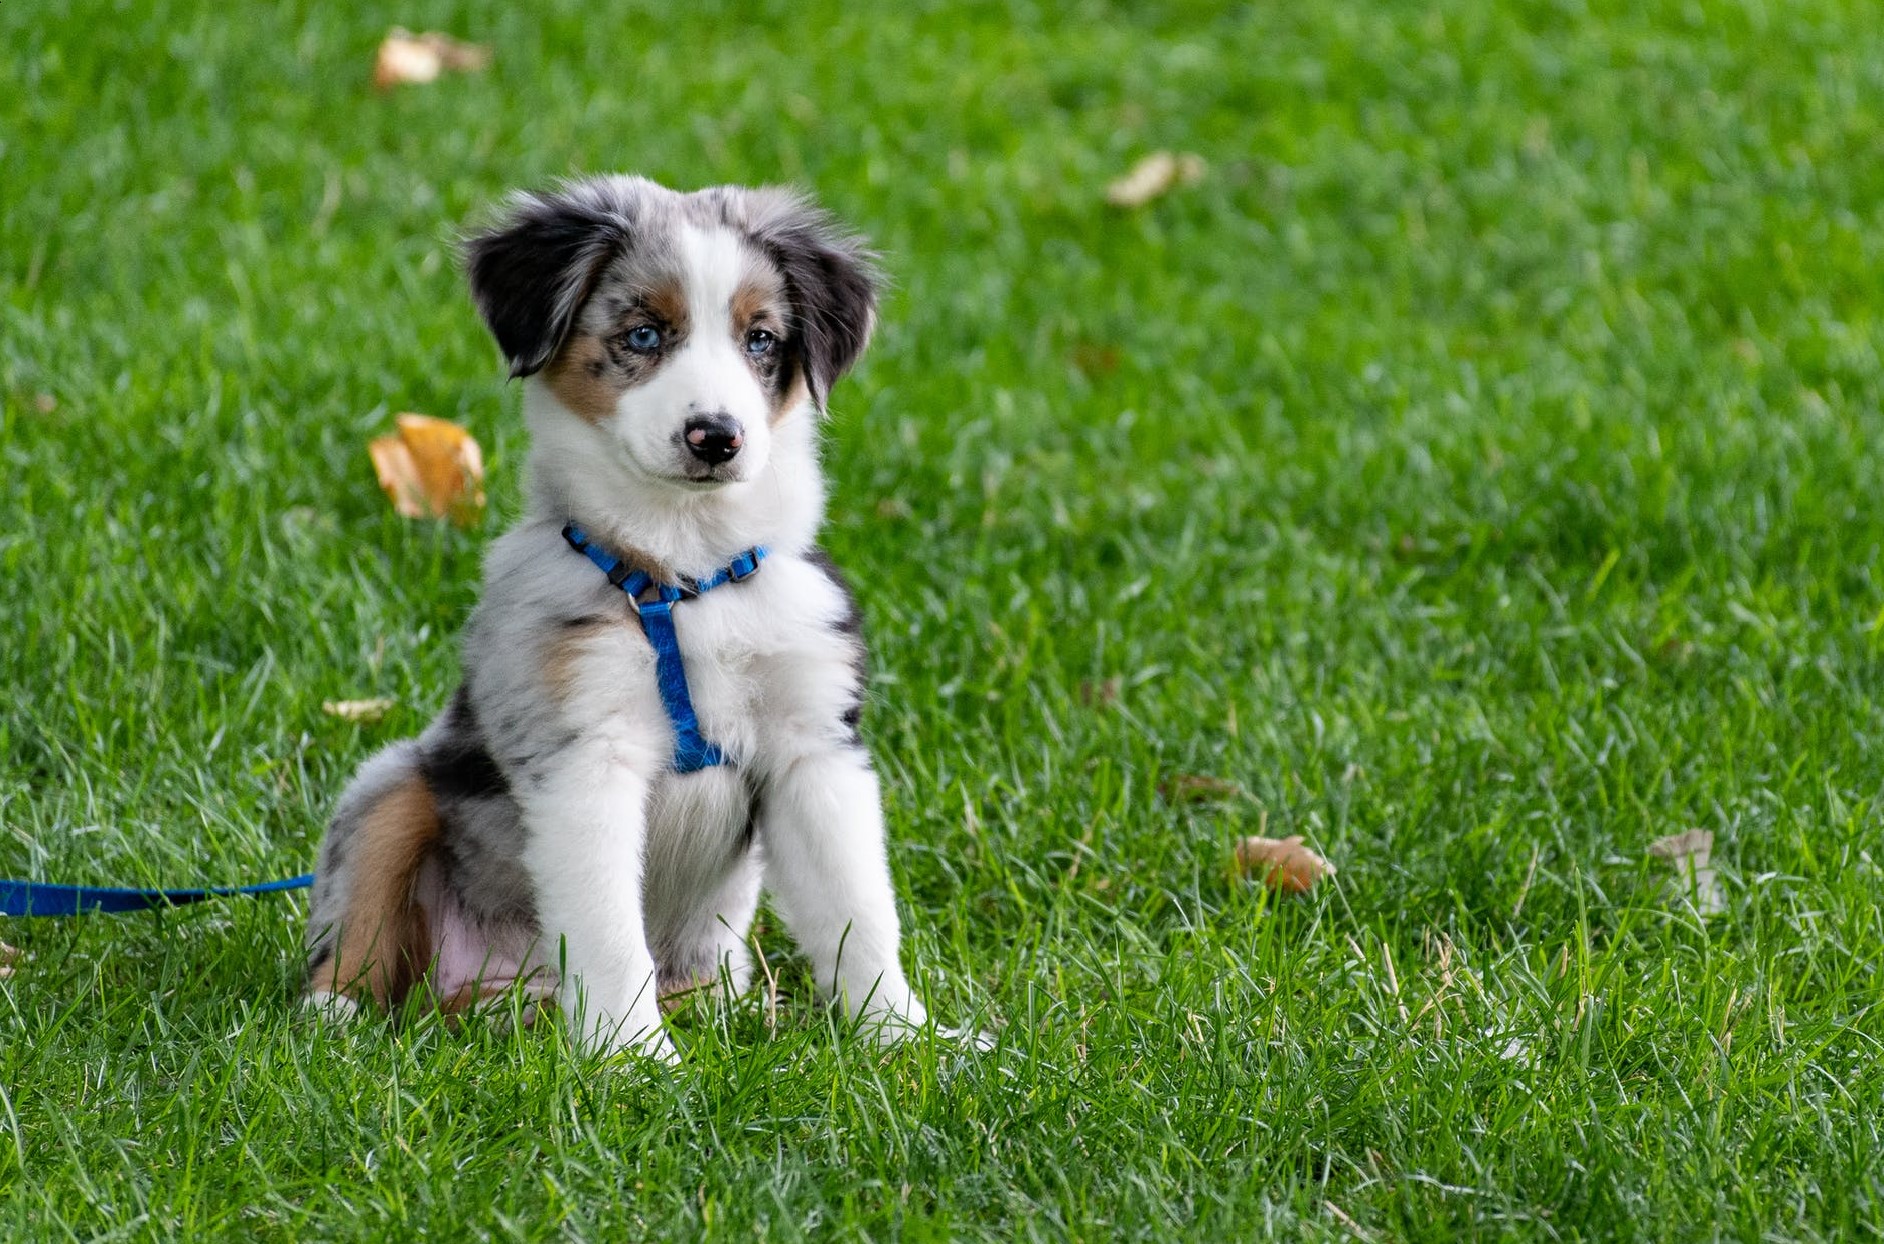 A puppy in a harness sitting on a garden lawn